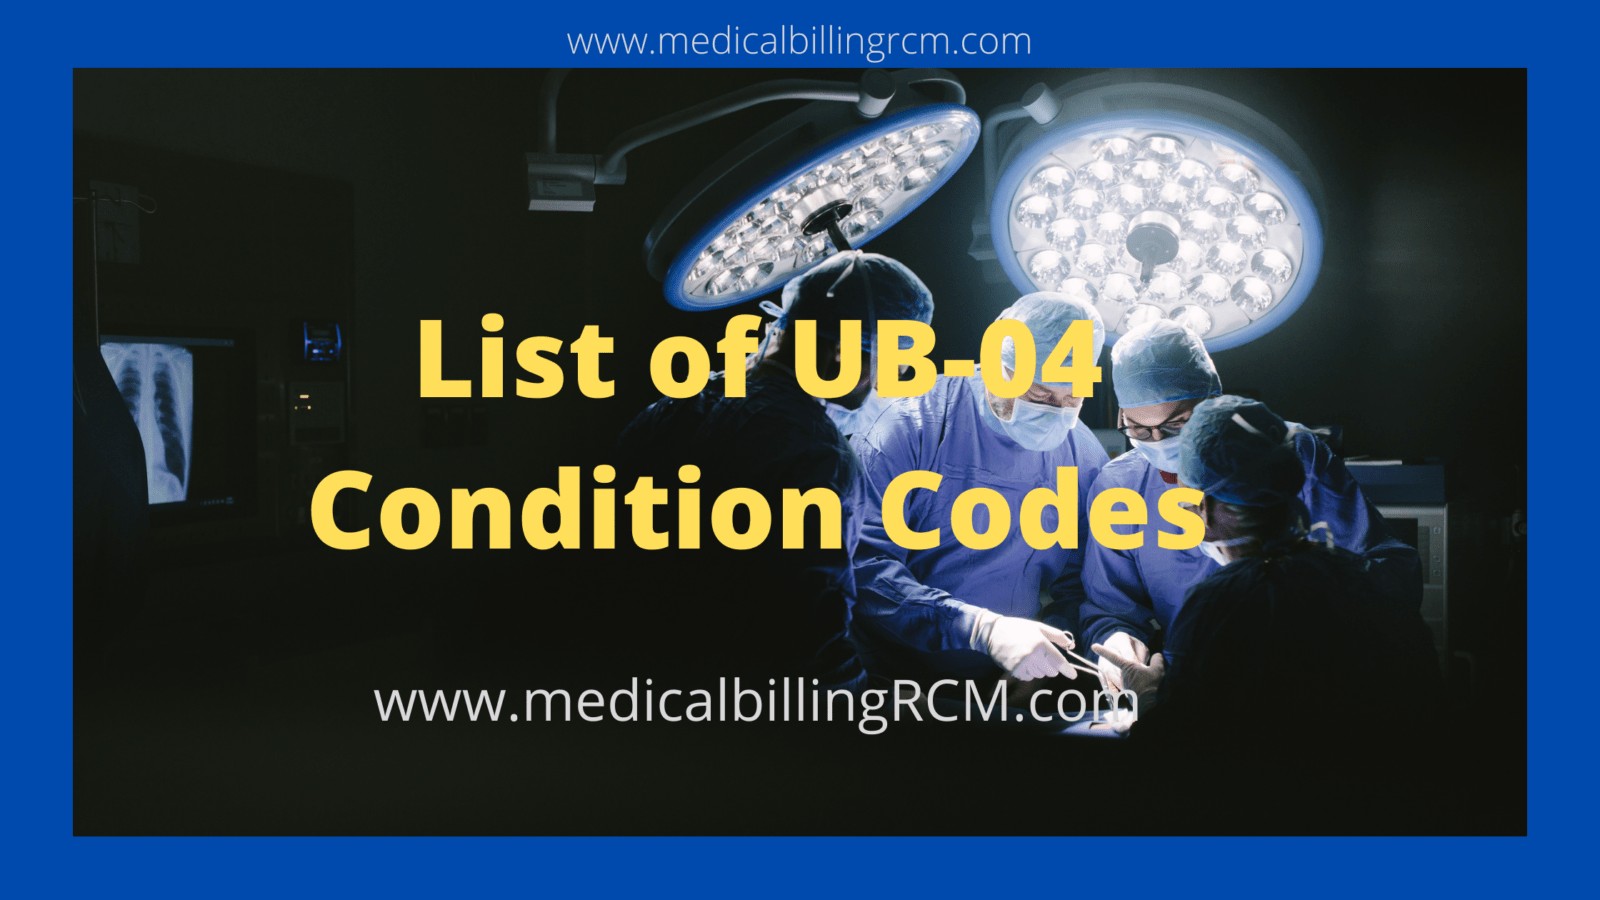 UB 04 condition codes list in medical billing